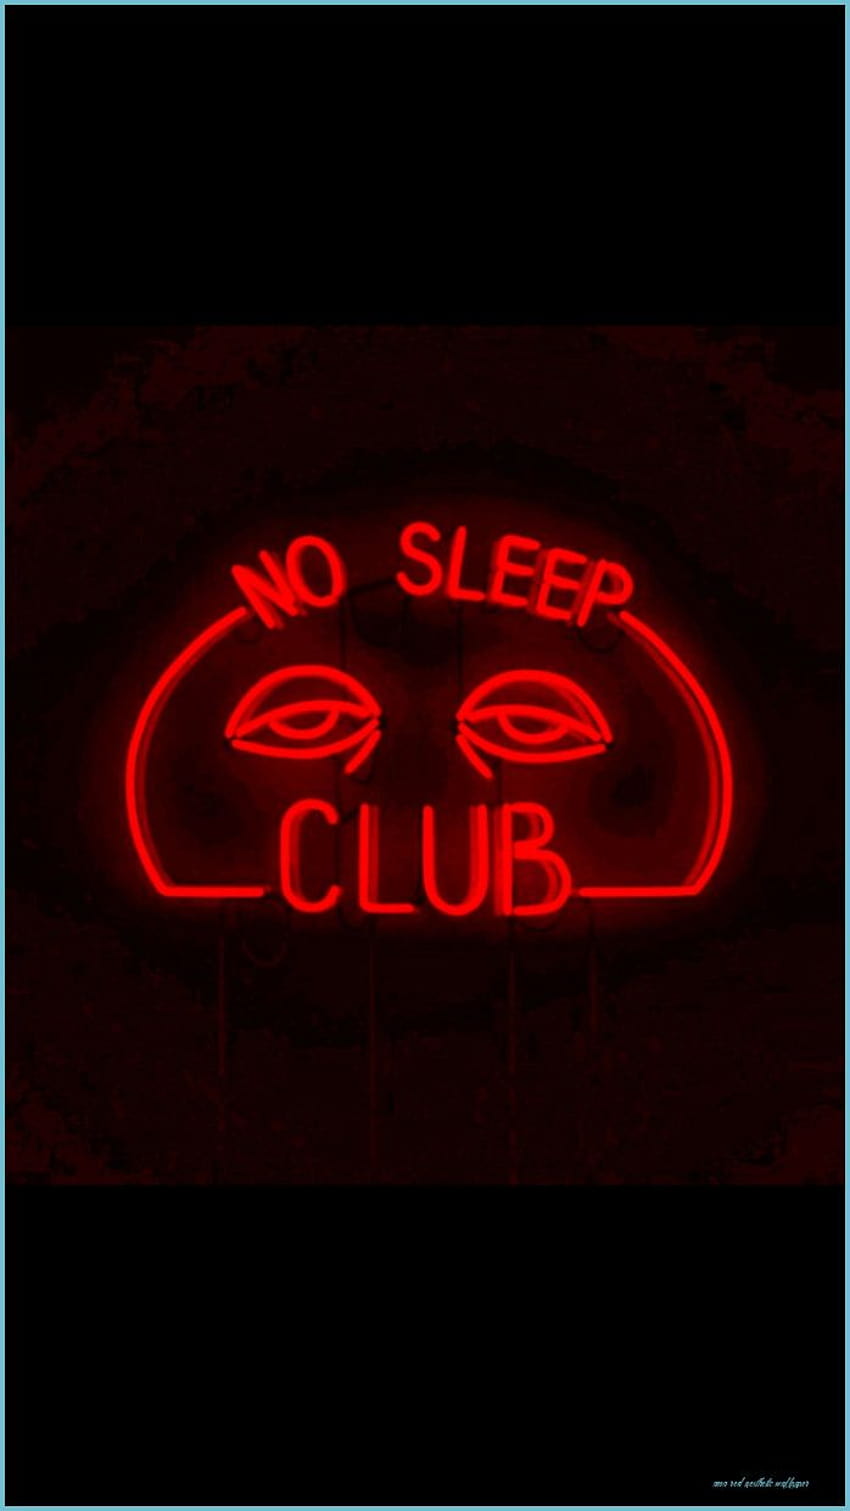 A neon sign that says no sleep club - Neon red